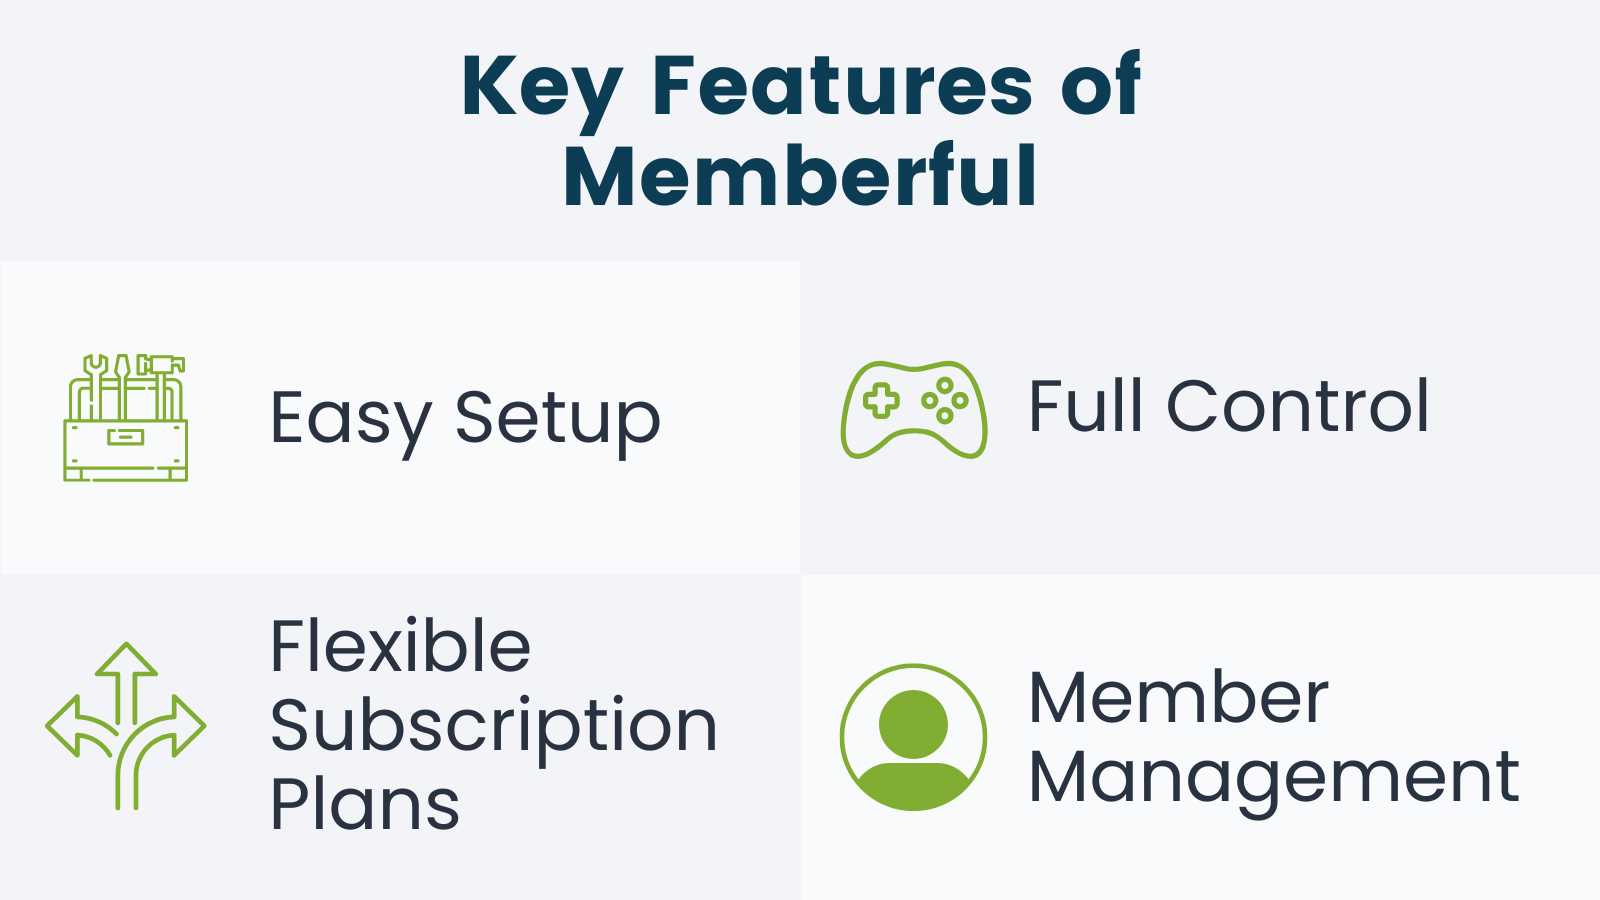 Infographic of Key Features of Memberful